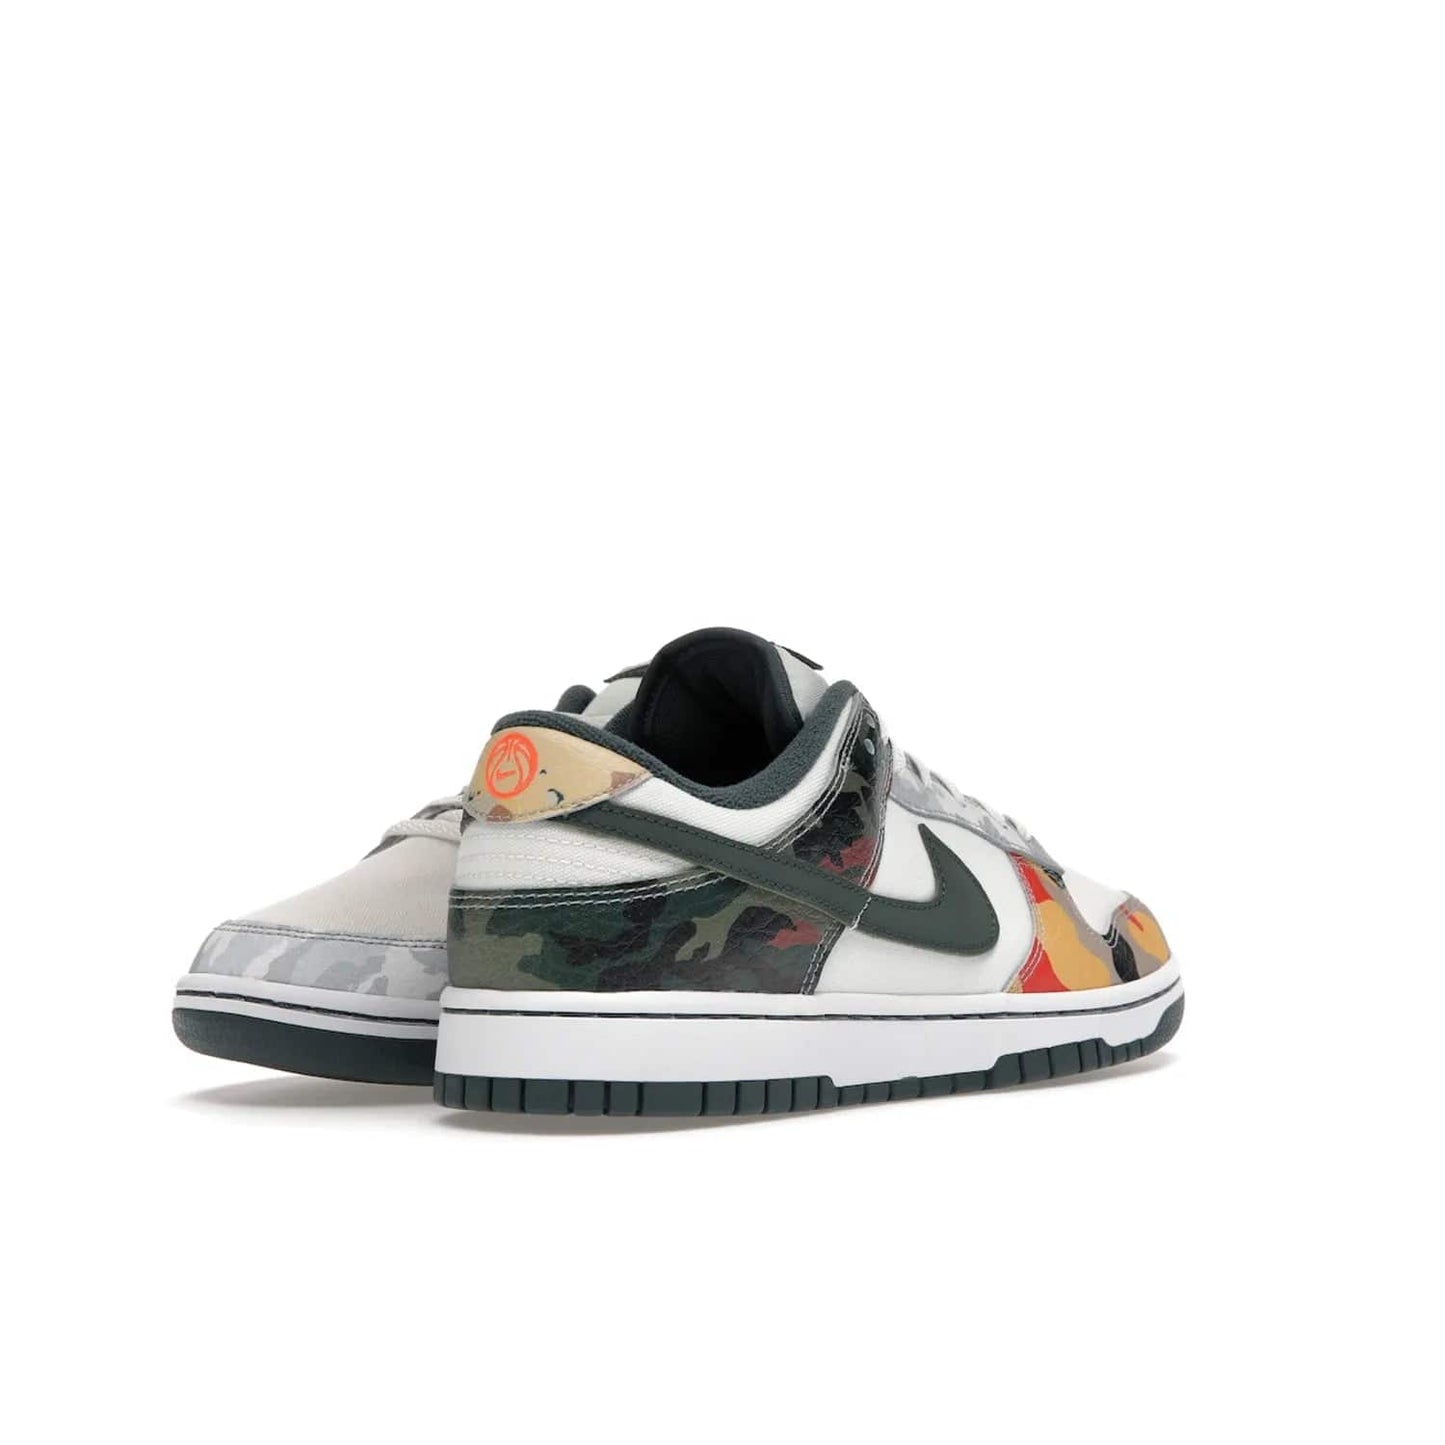 Nike Dunk Low SE Sail Multi-Camo - Image 32 - Only at www.BallersClubKickz.com - Classic design meets statement style in the Nike Dunk Low SE Sail Multi-Camo. White leather base with multi-color camo overlays, vibrant Nike Swooshes, and orange Nike embroidery. Get yours August 2021.